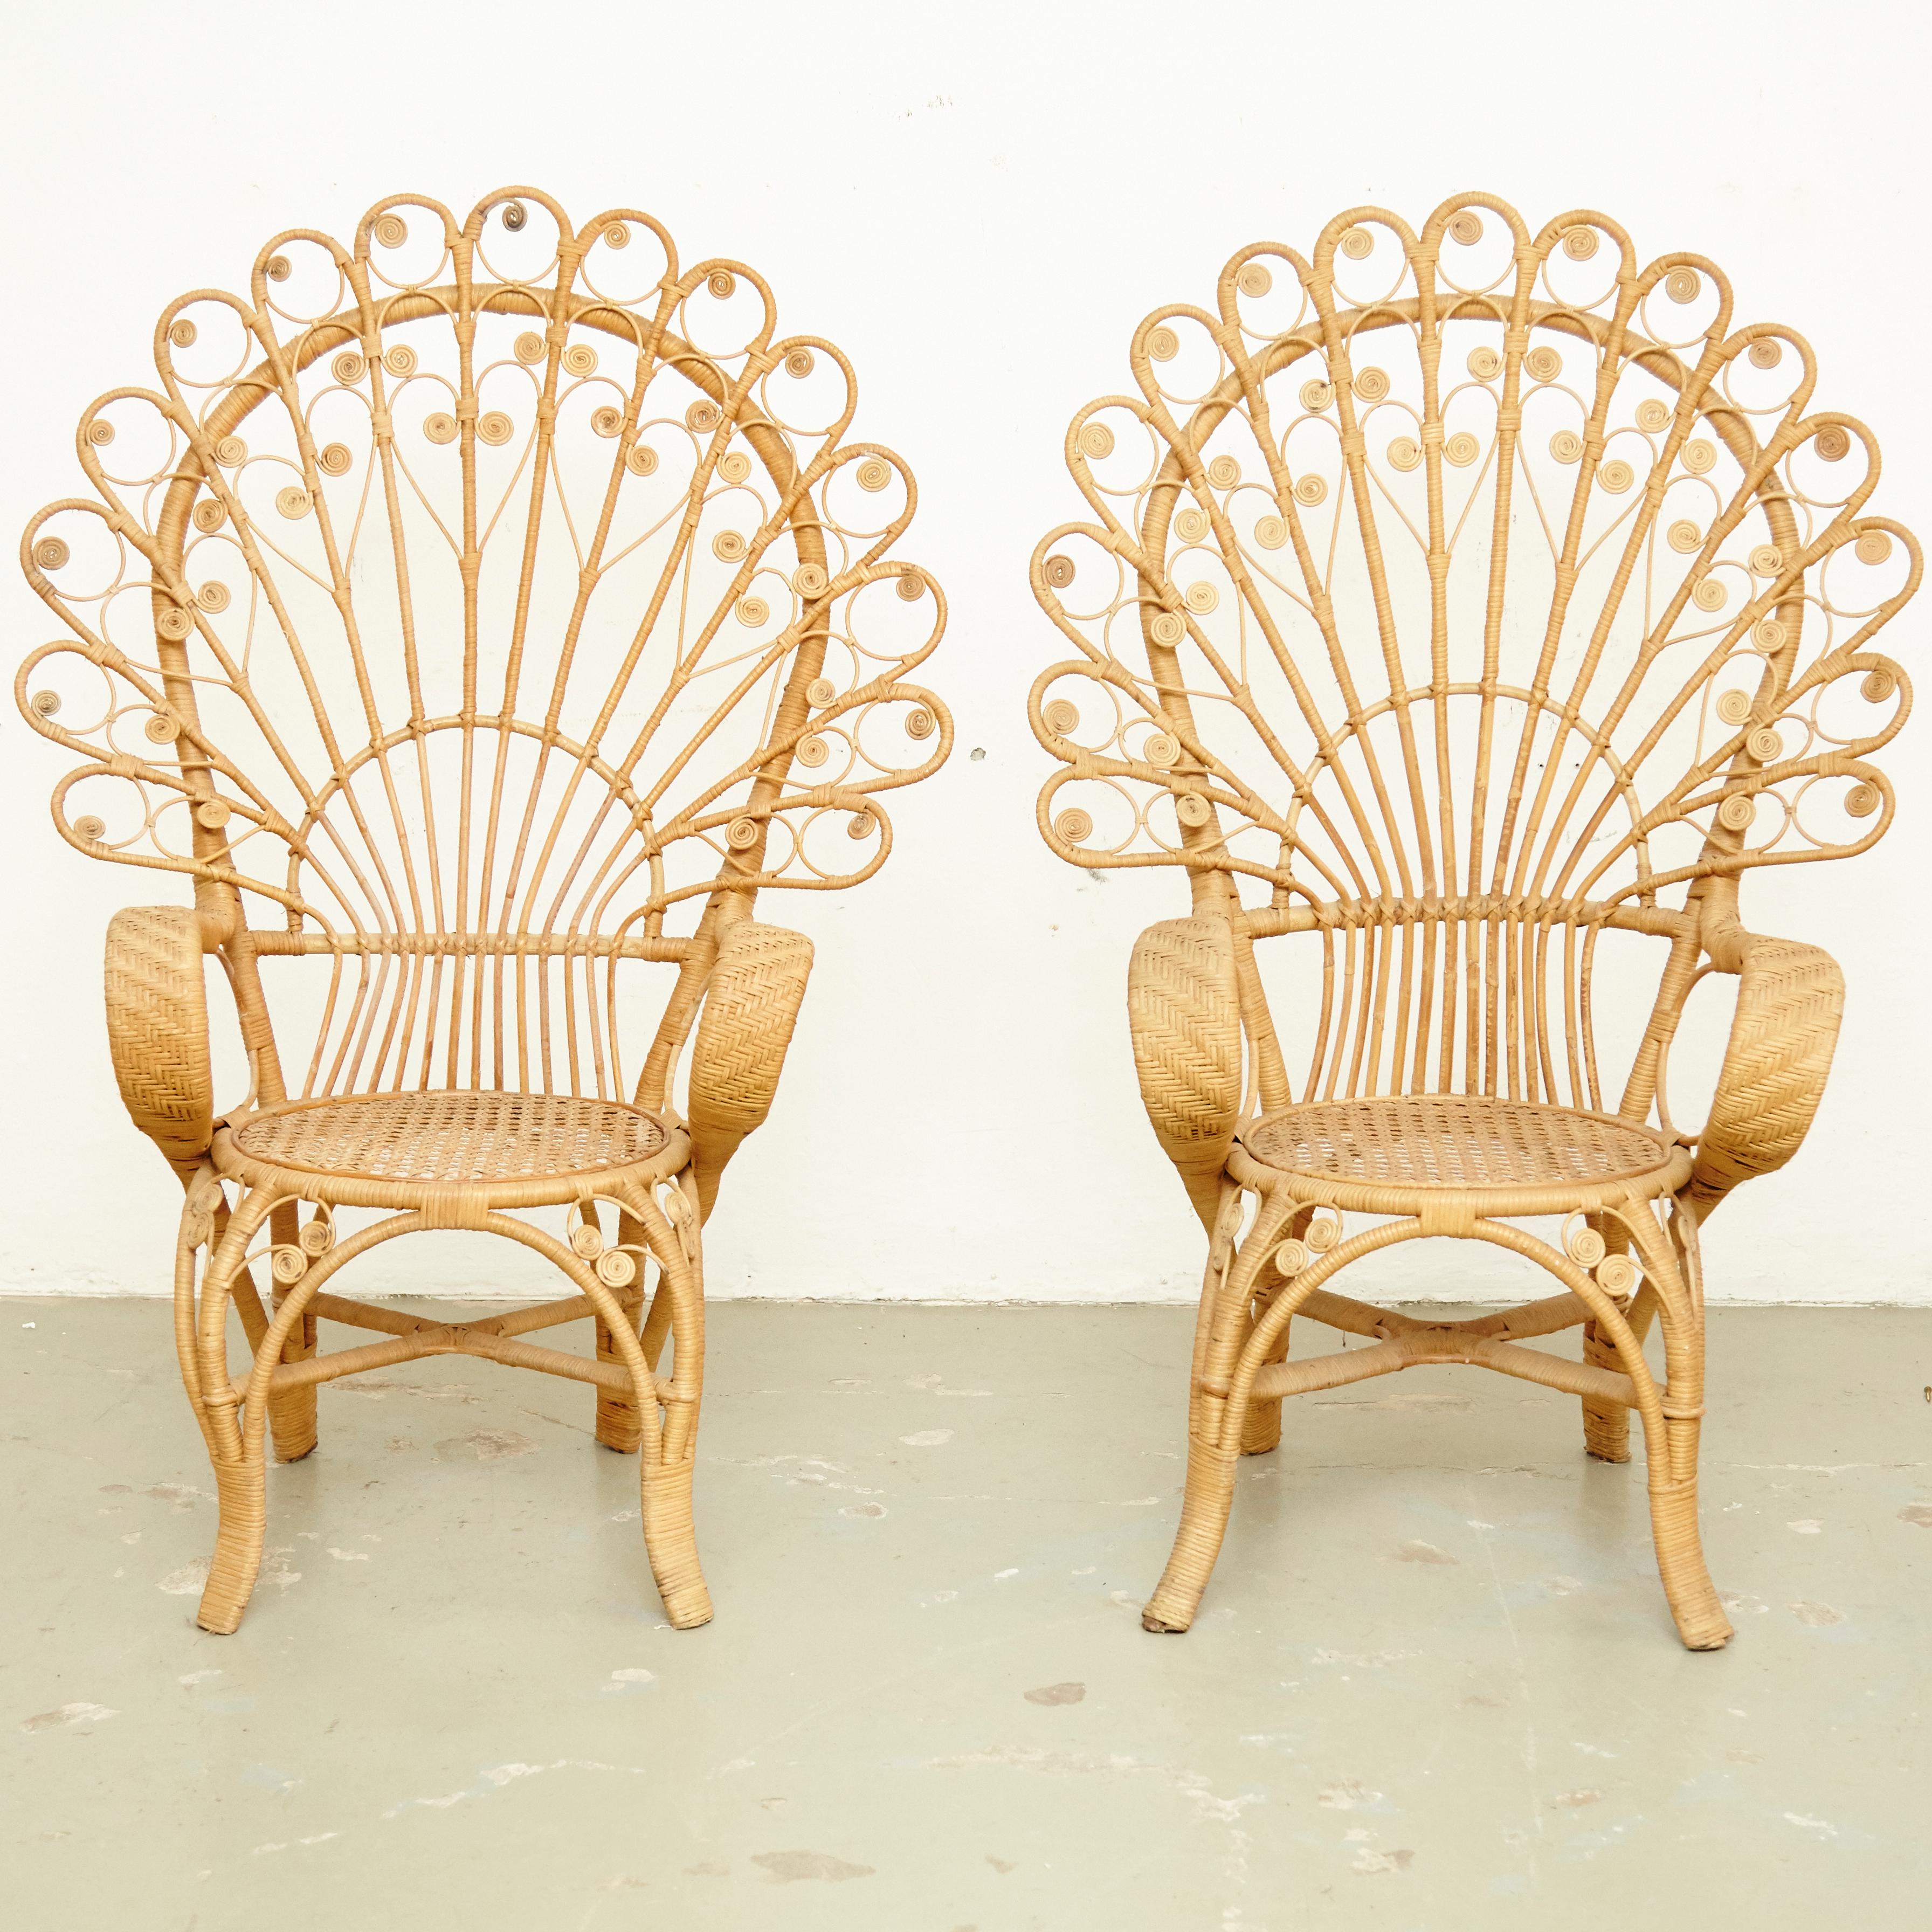 Spanish Set of Four Mid-Century Modern Bamboo and Rattan Chair, circa 1960